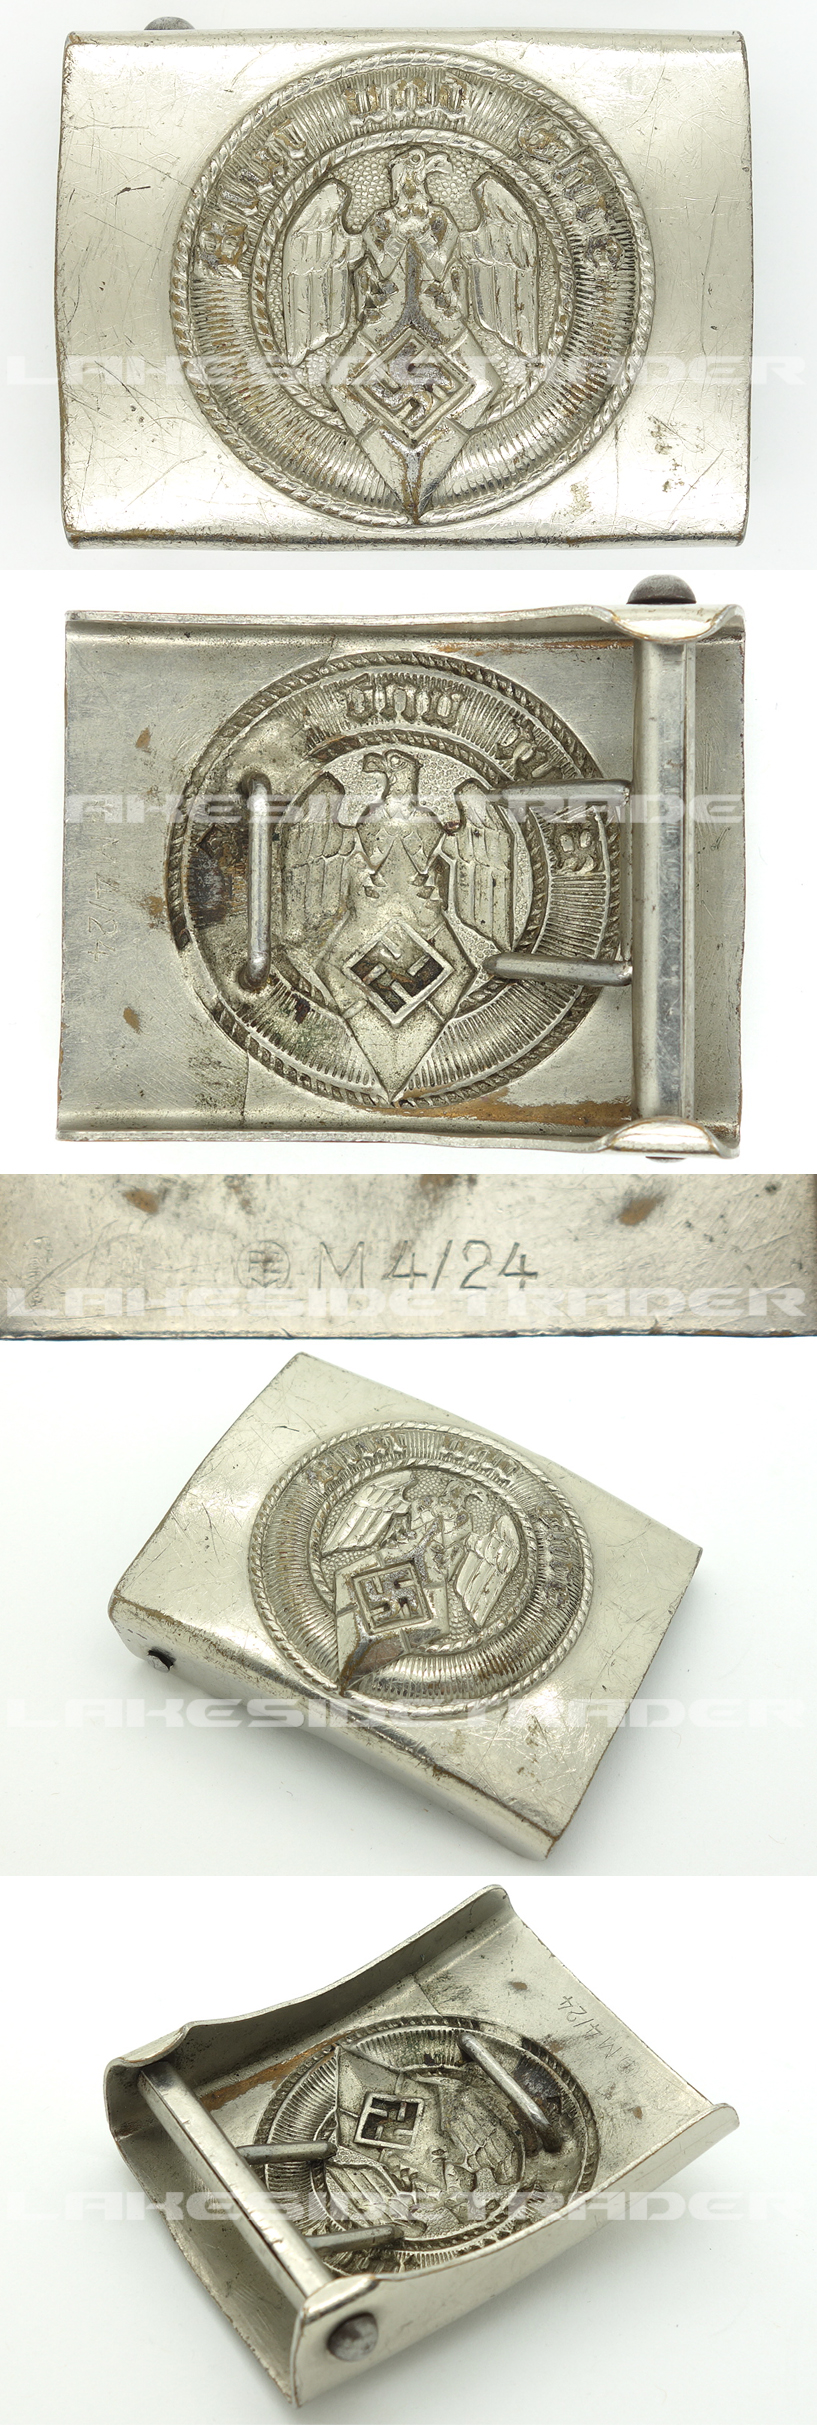 Hitler Youth Belt Buckle by RZM M4/24